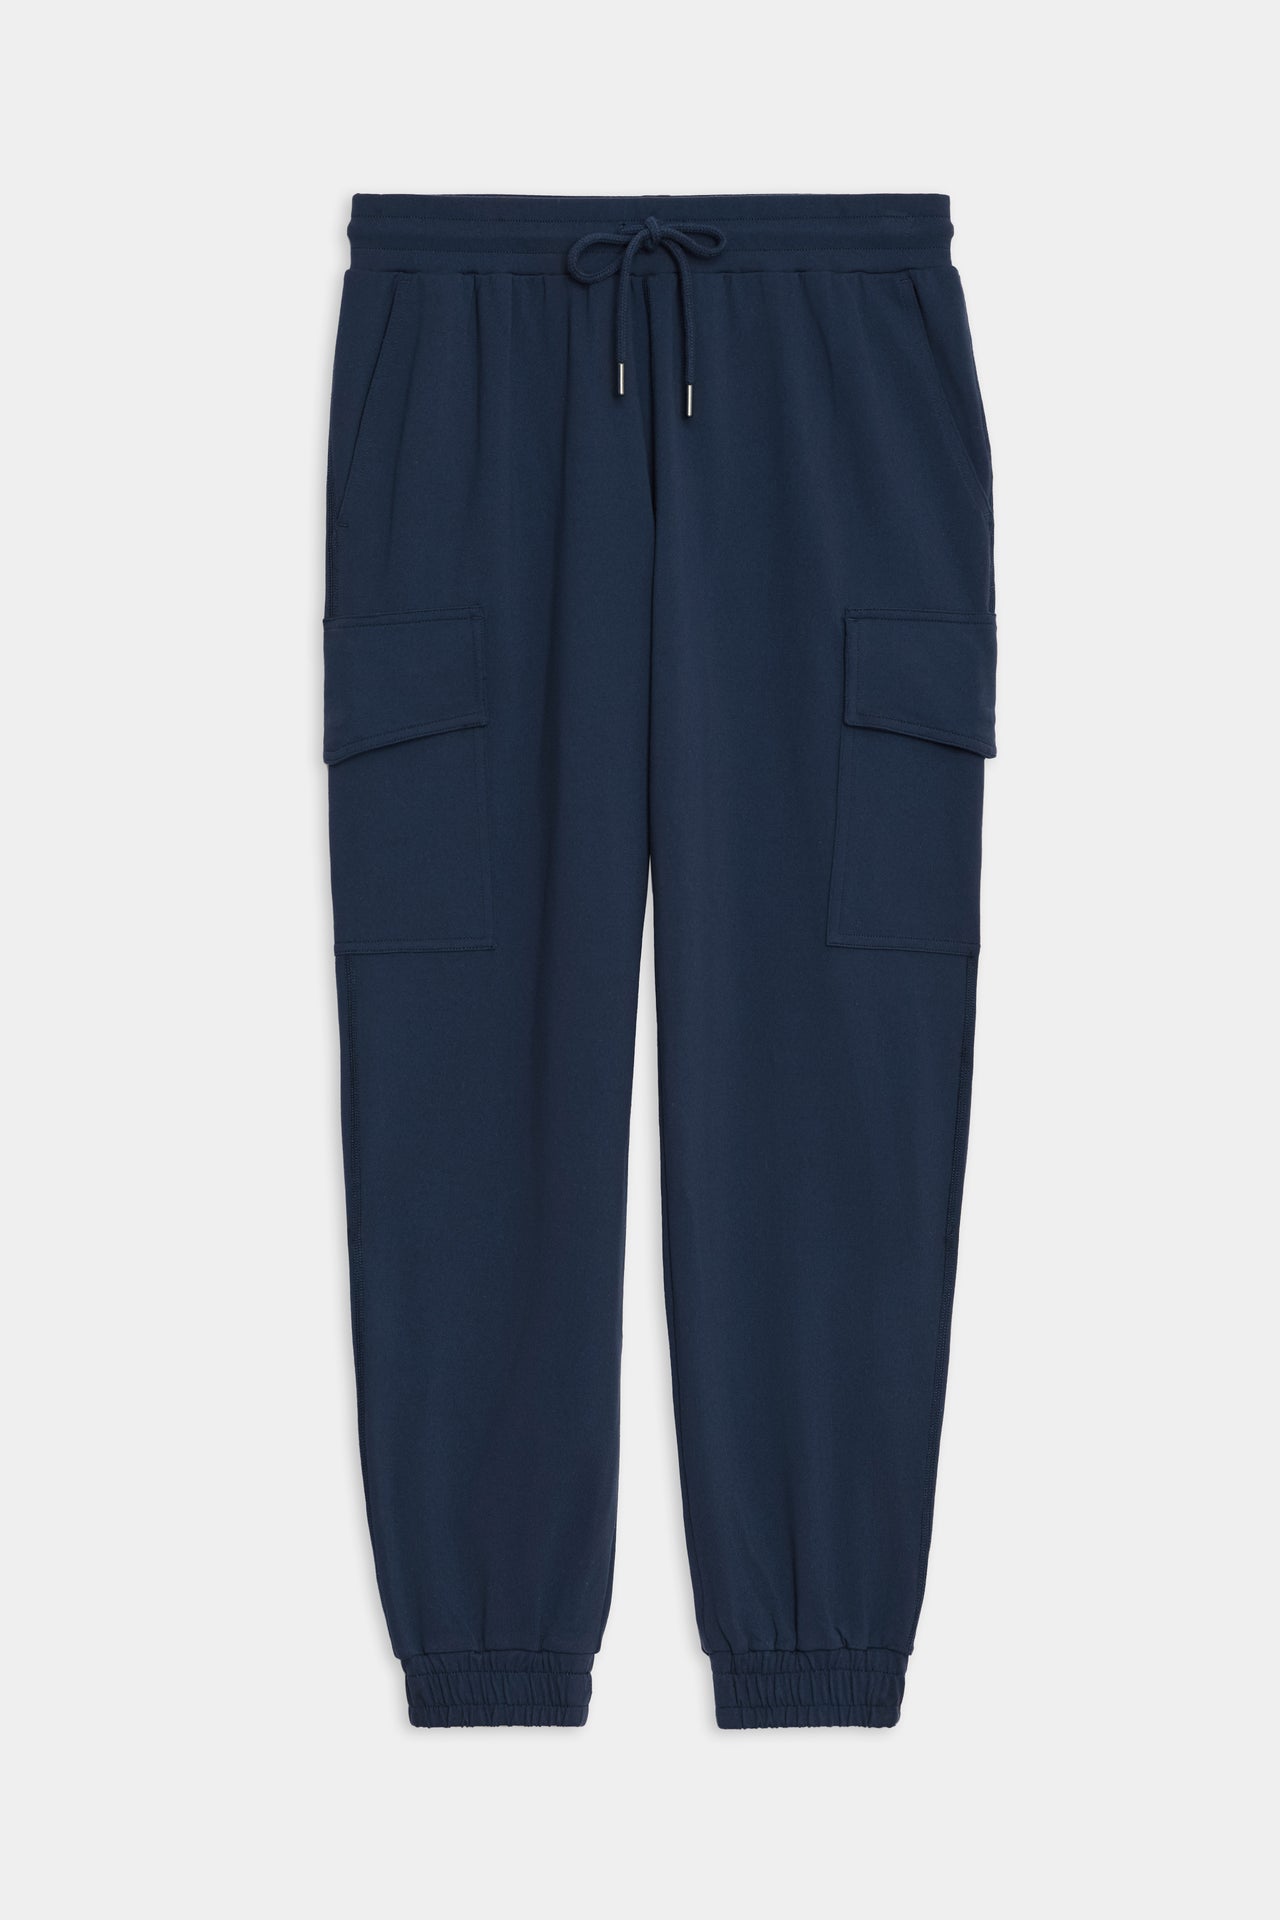 Front flat view of dark blue cargo pants